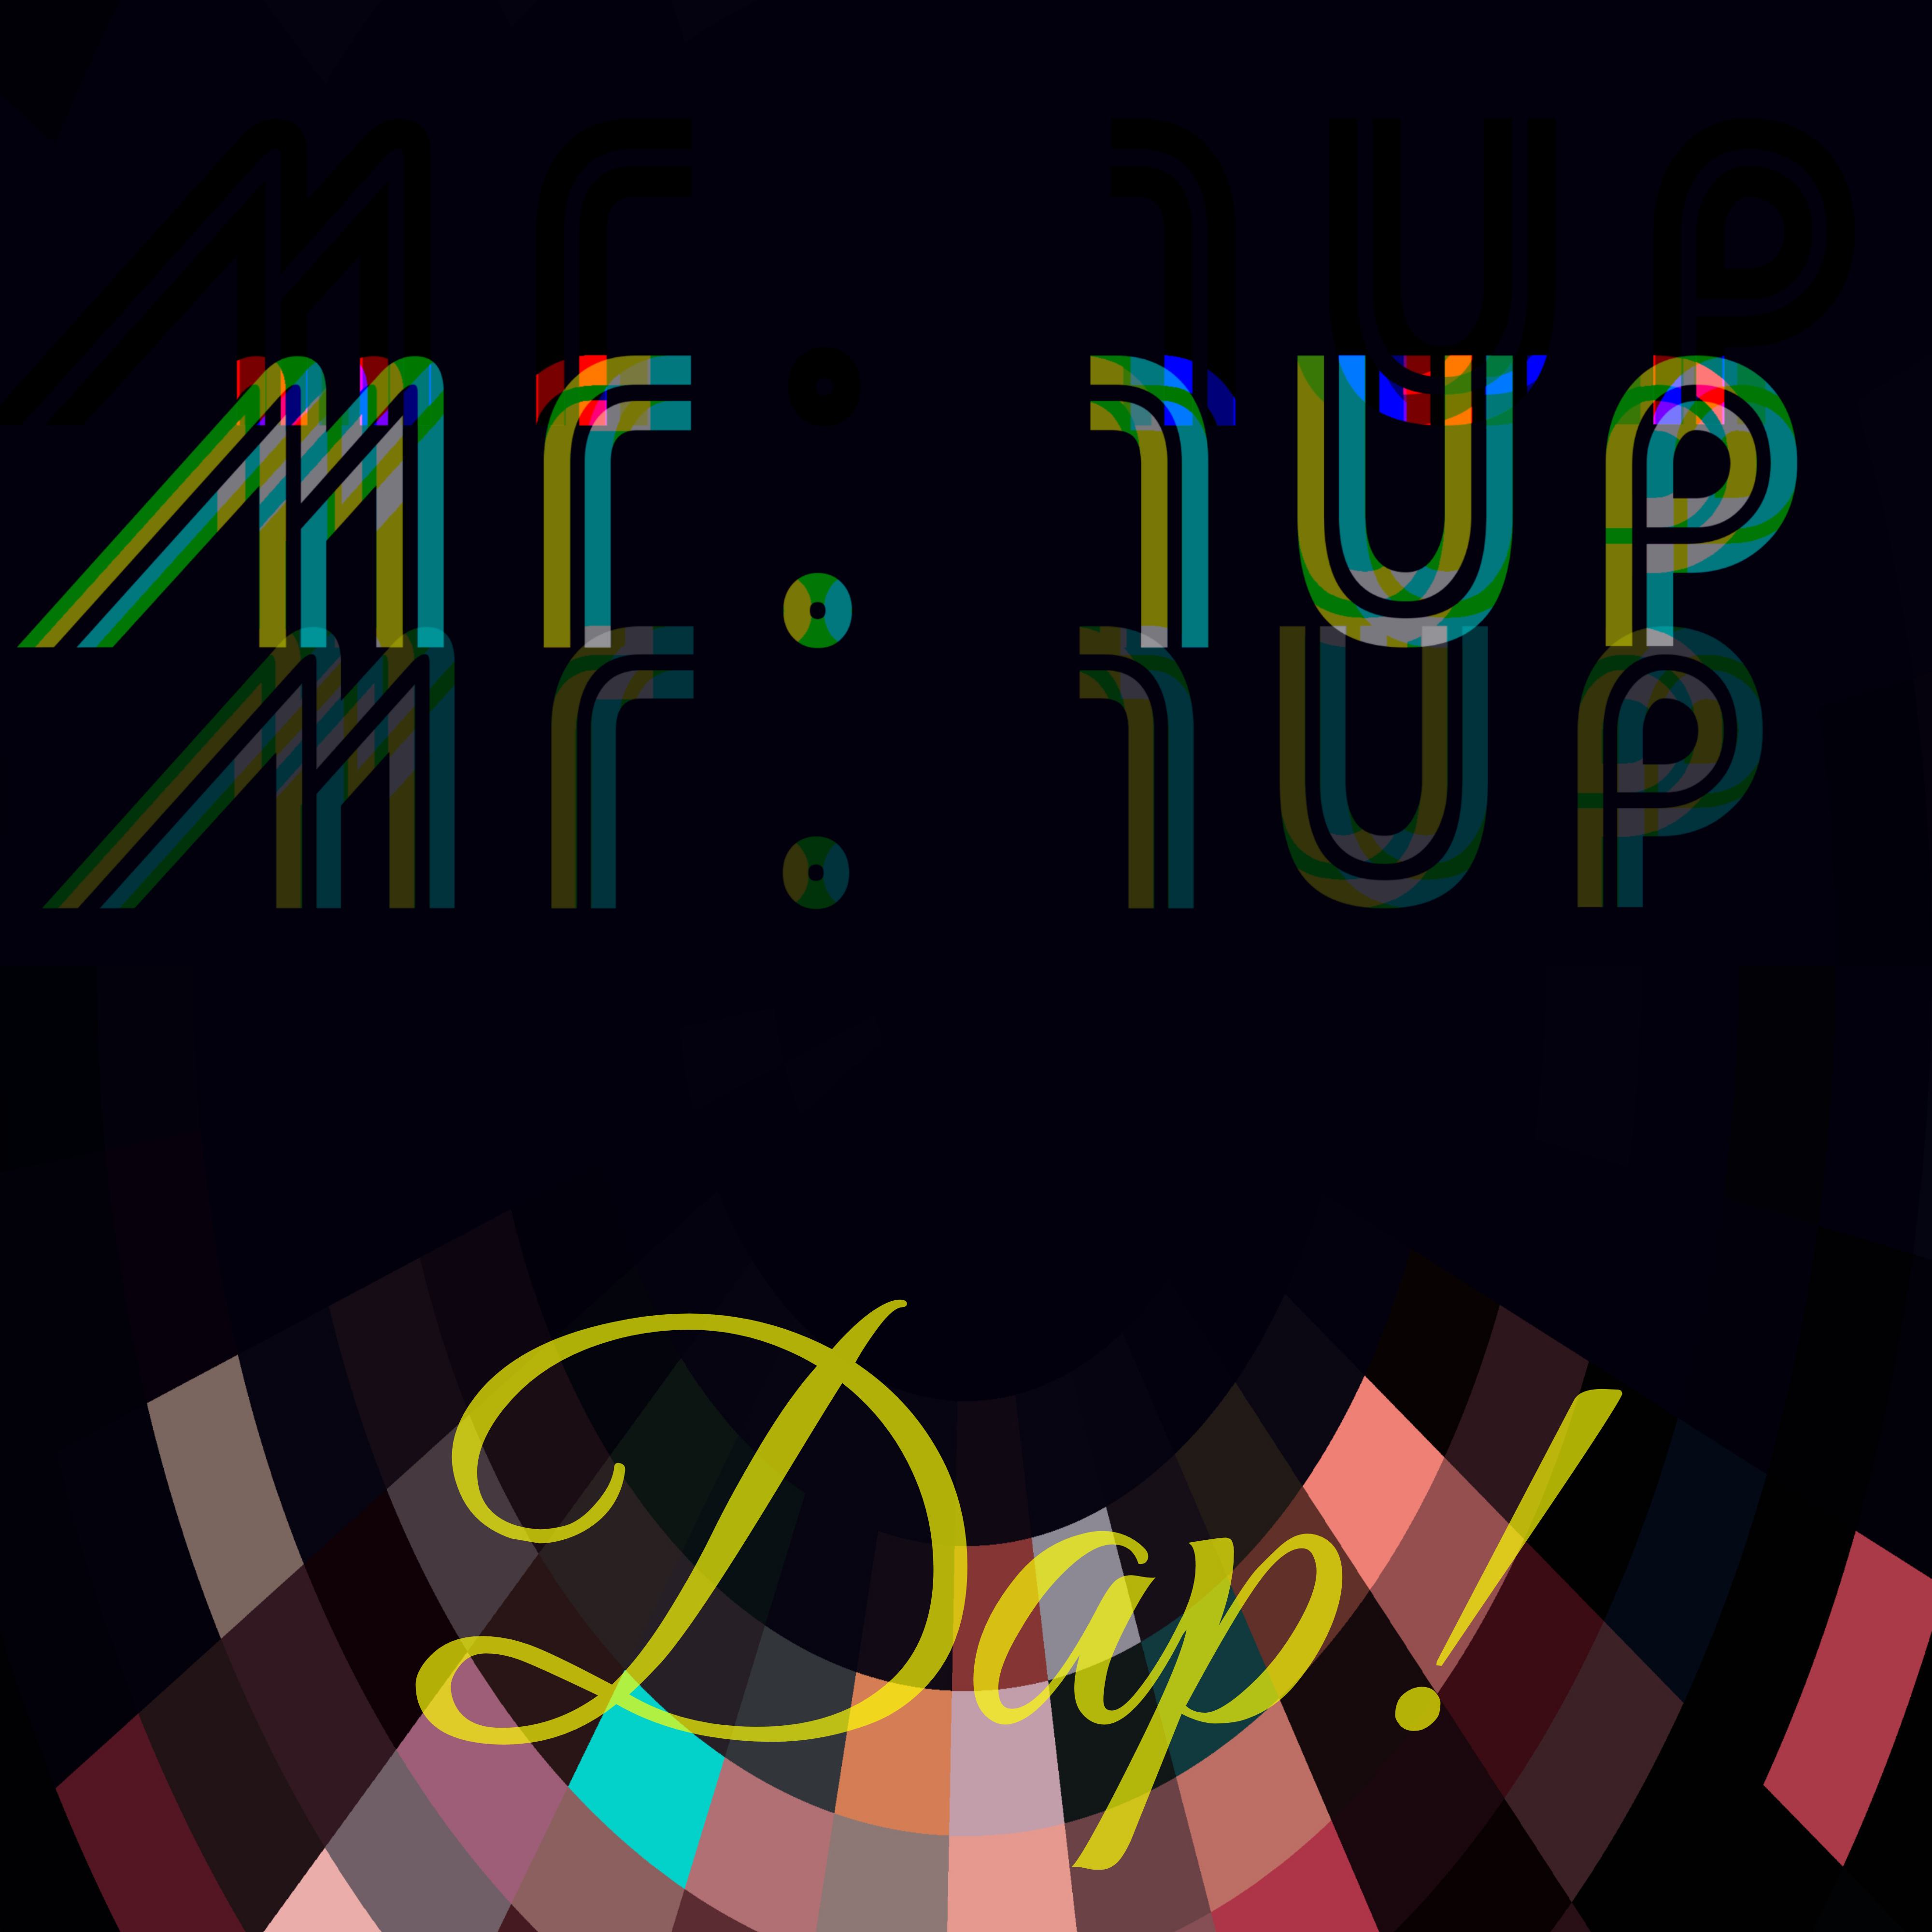 “Dap!” marks Mr. 1up’s third EP, following the release of his “Nobody” and “Open” EPs